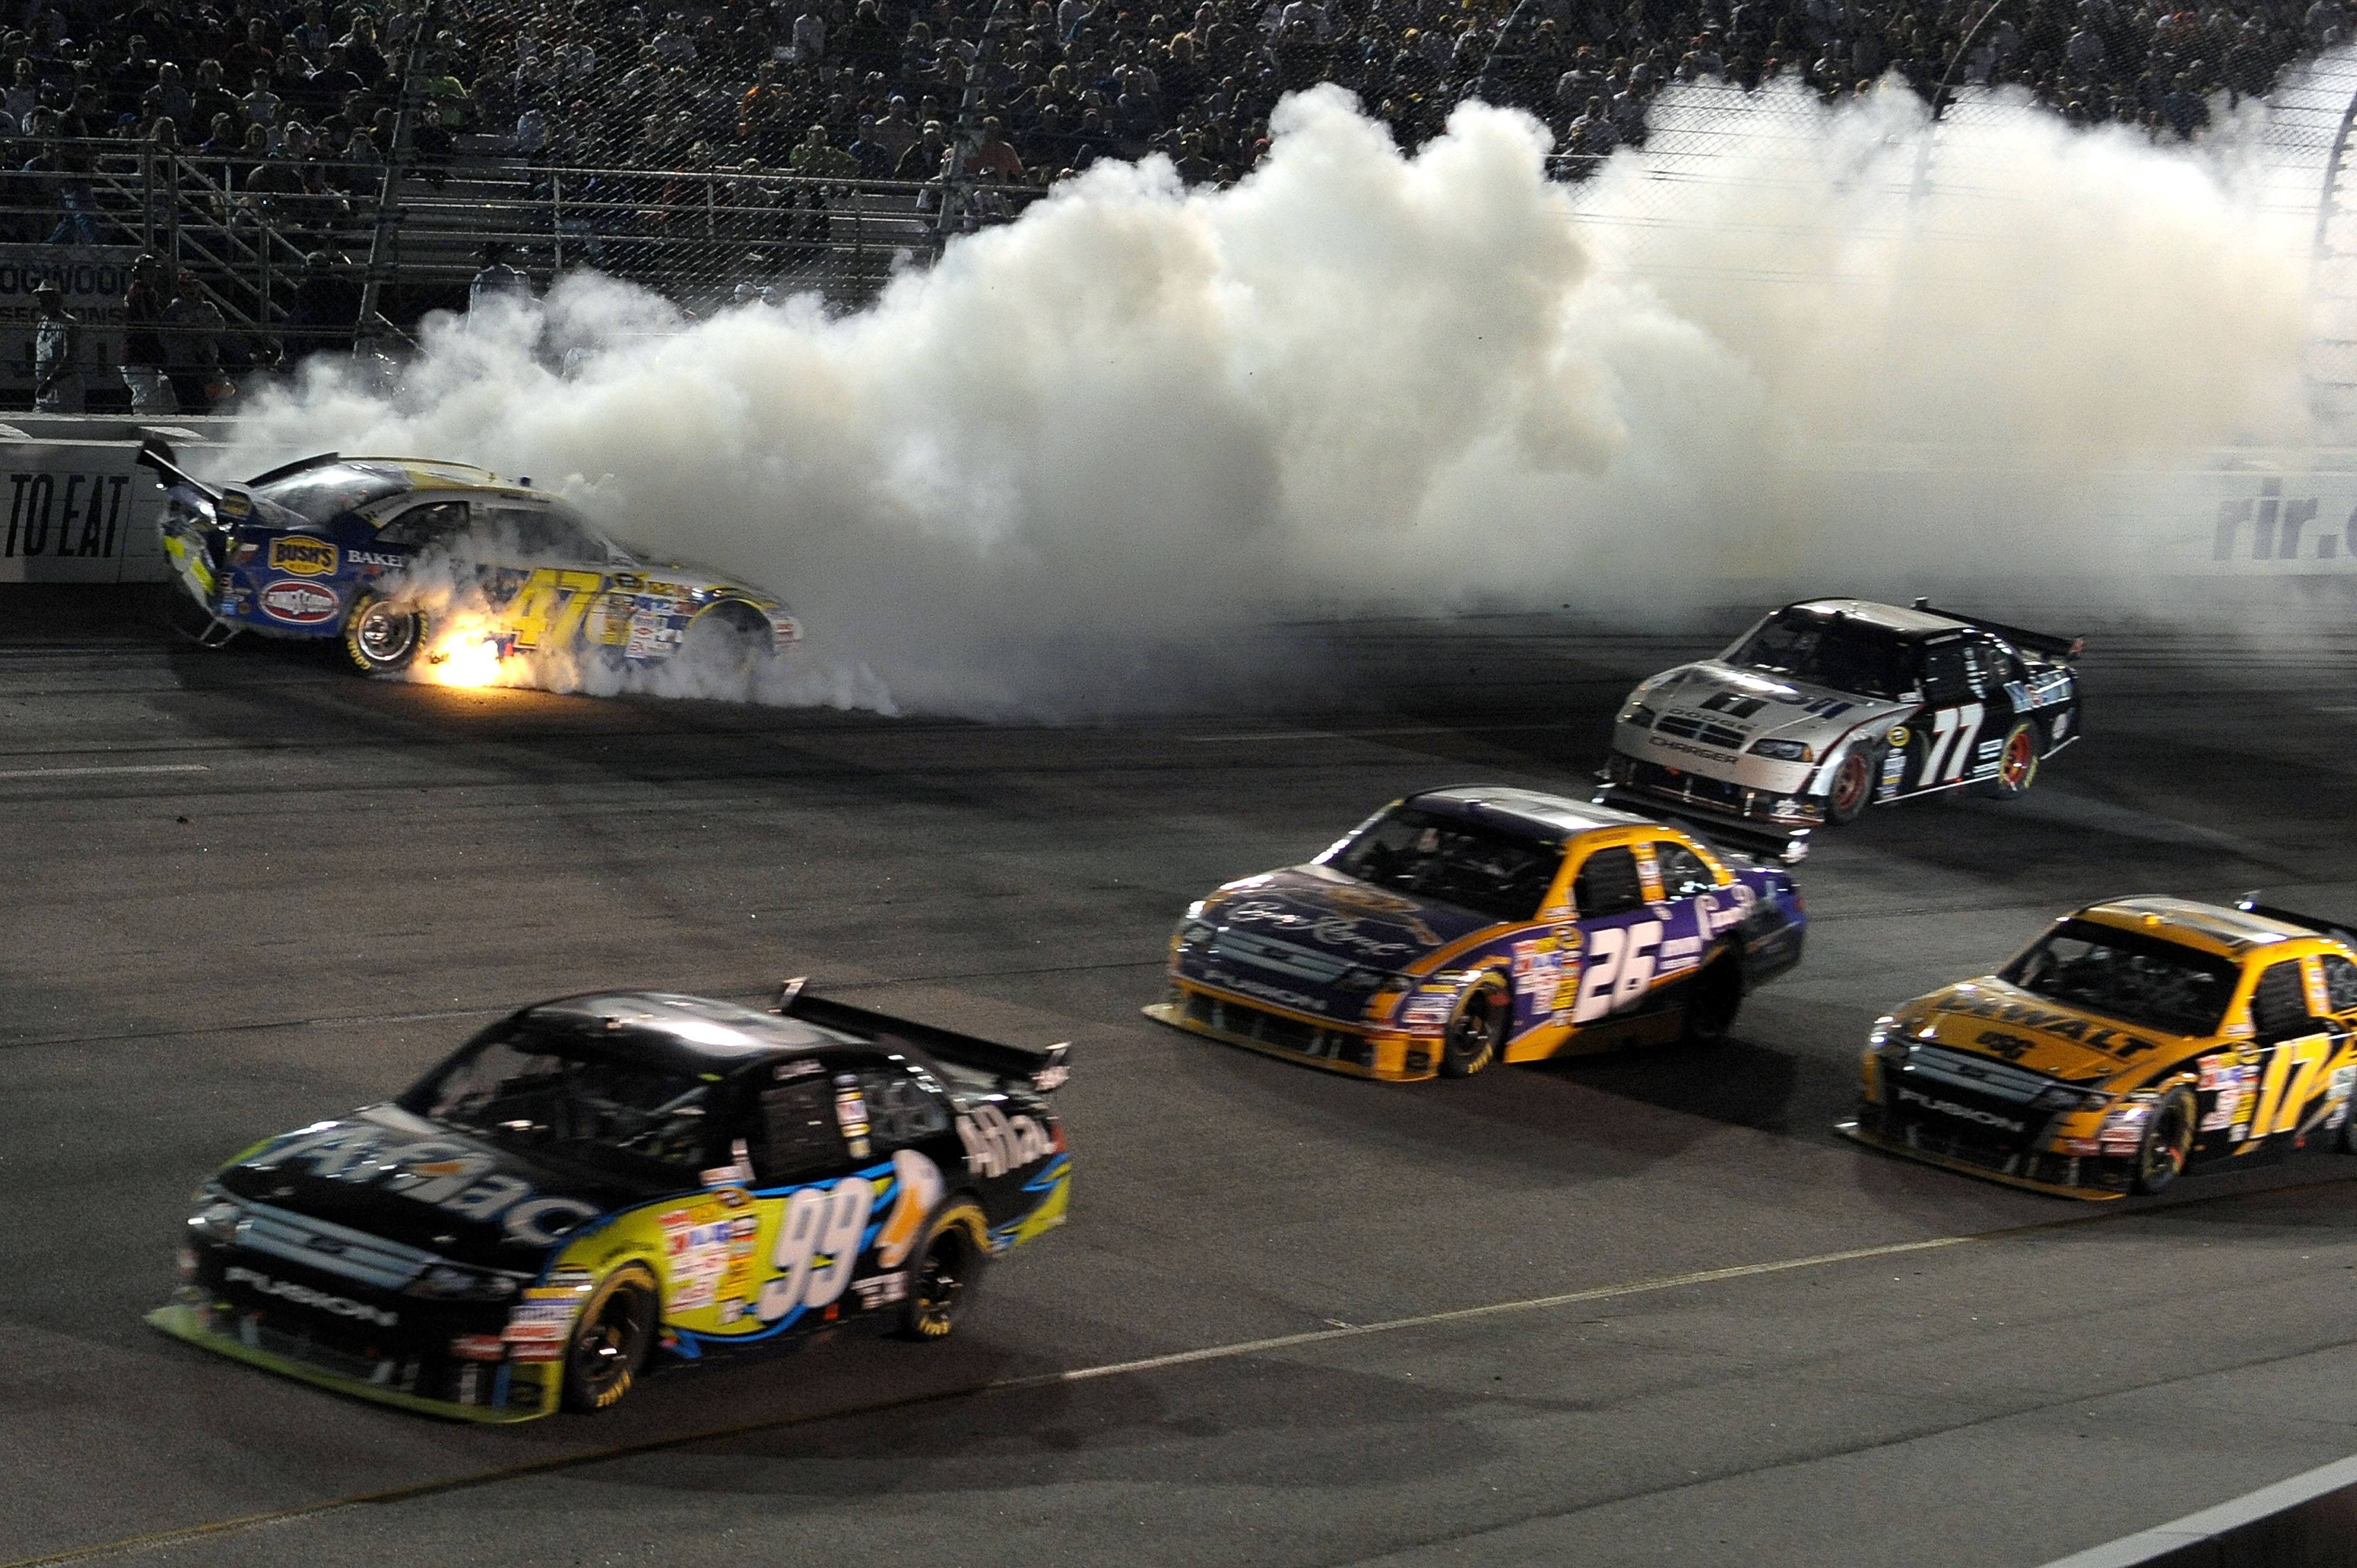 Richmond International Raceway can be exciting with the multiple race grooves and the short track style racing.